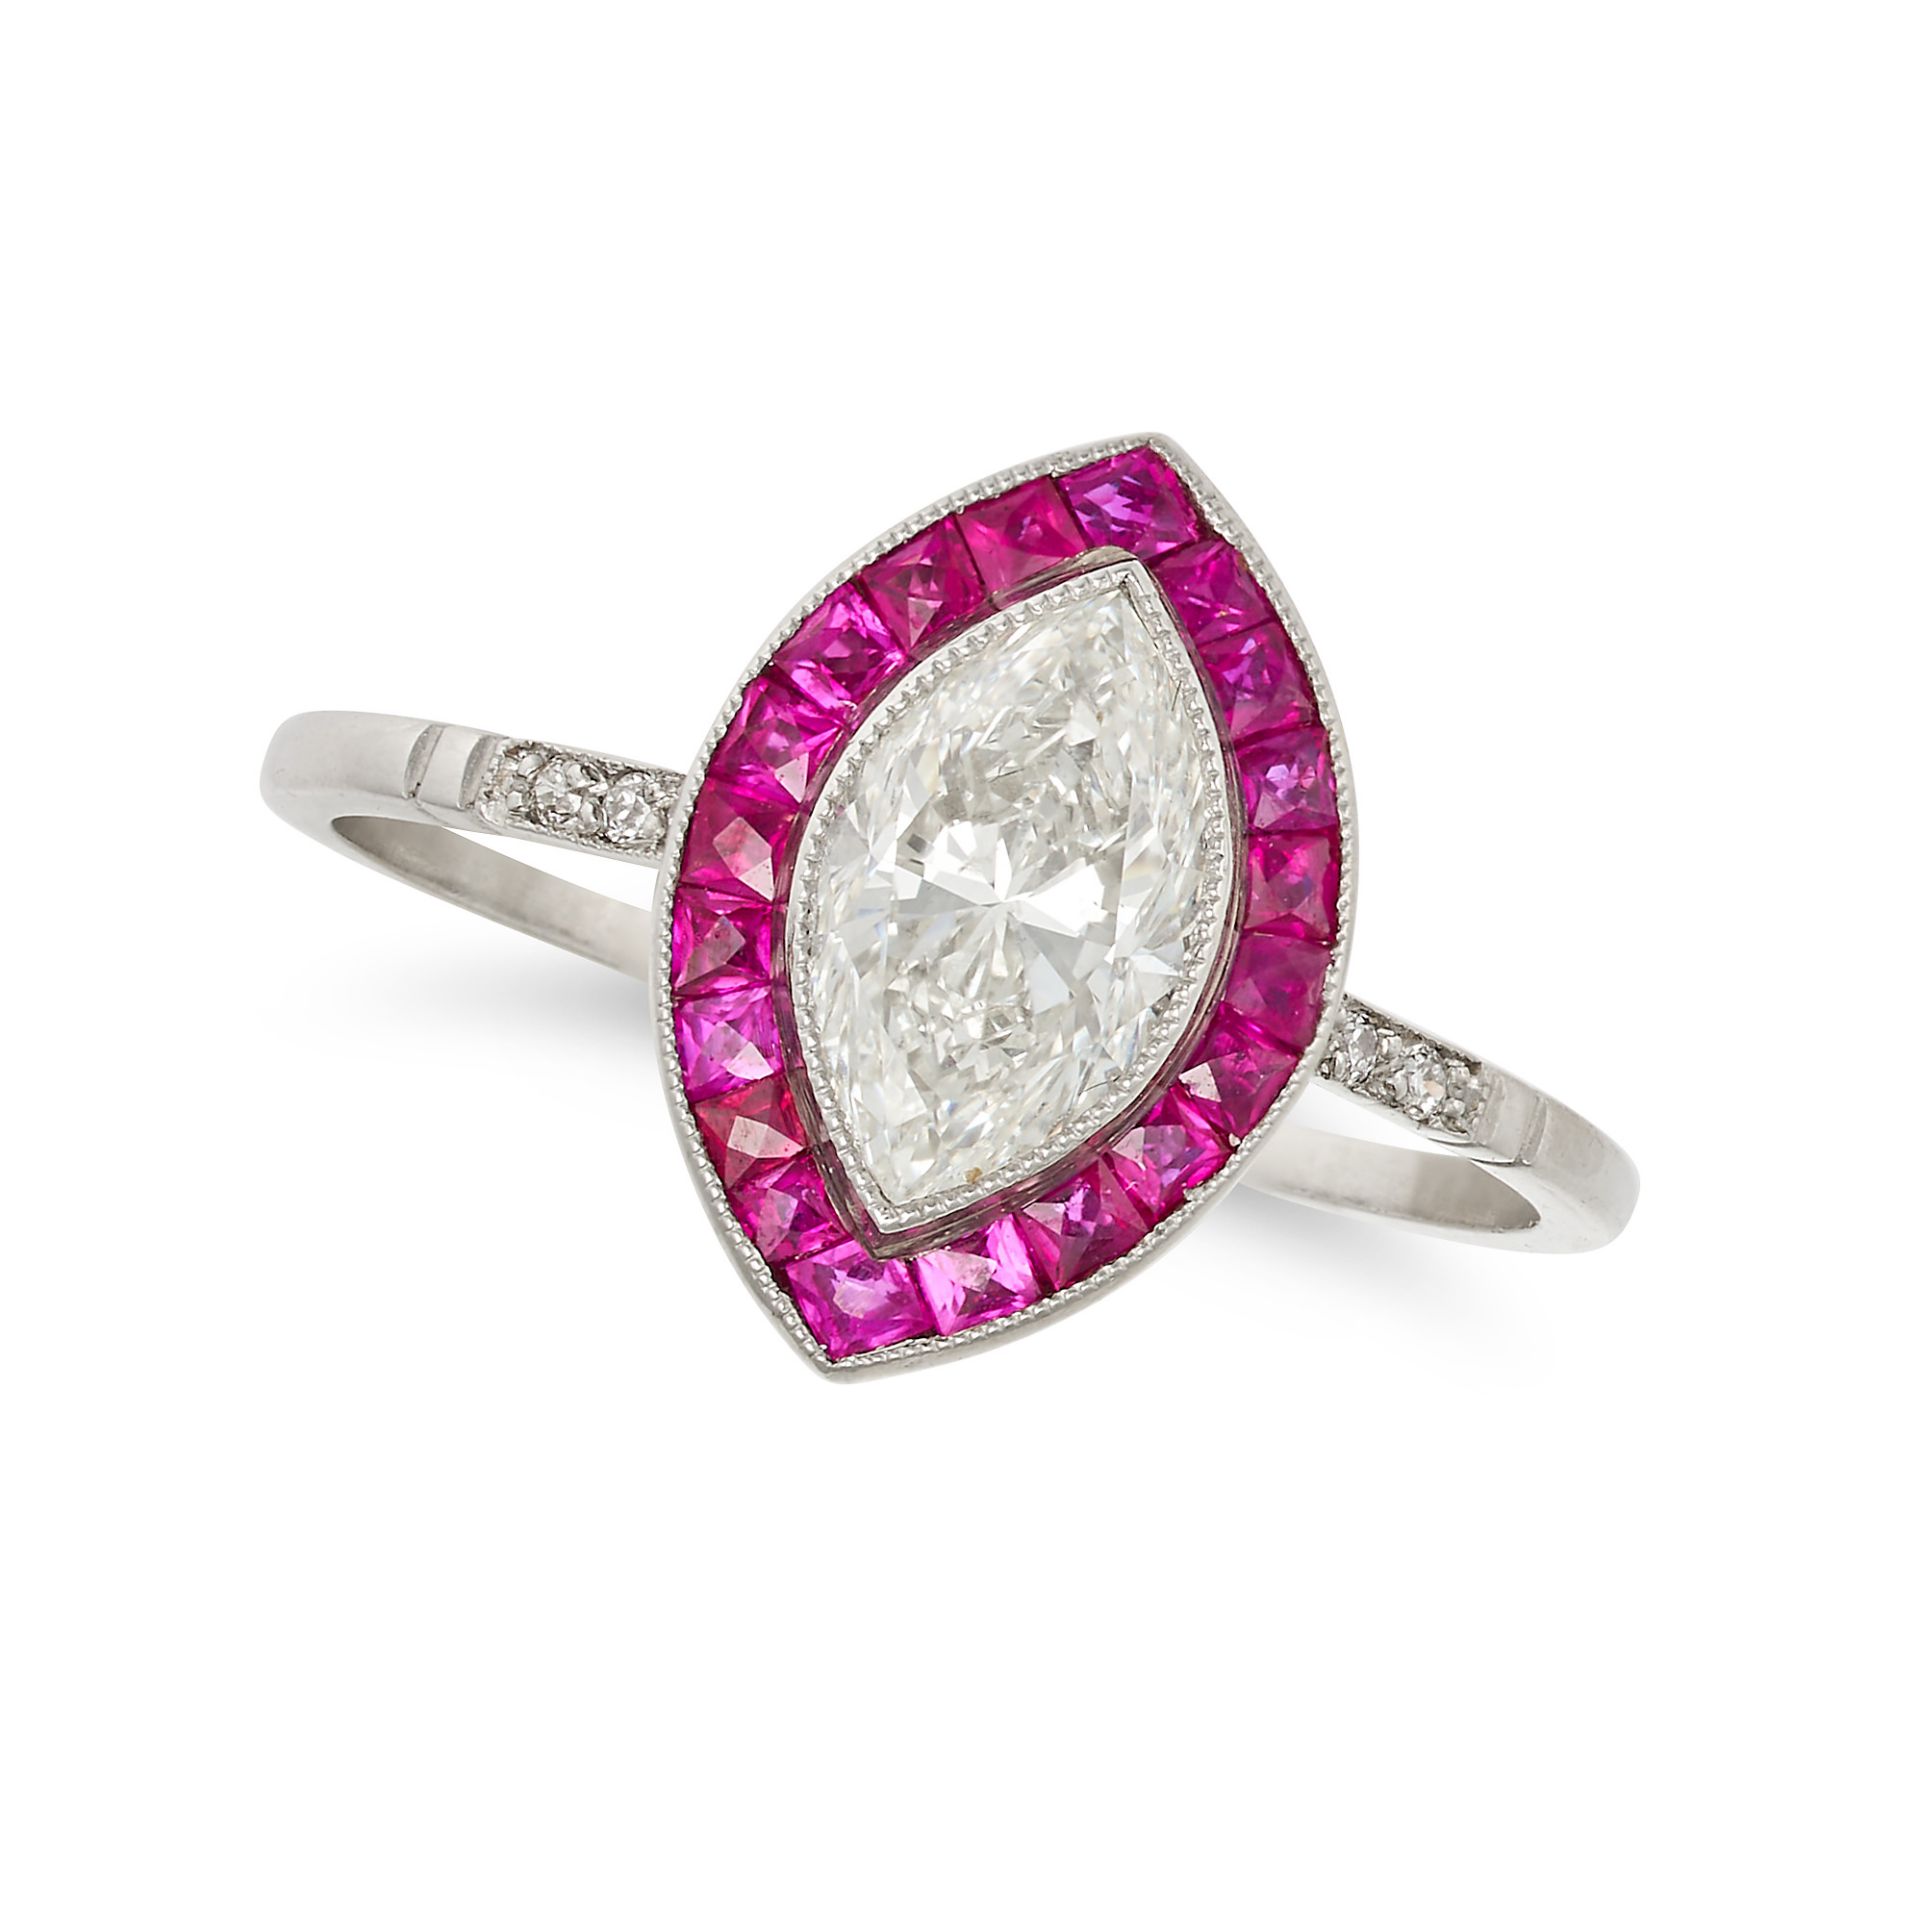 A DIAMOND AND RUBY TARGET RING in platinum, set with a marquise cut diamond of 1.02 carats in a b...